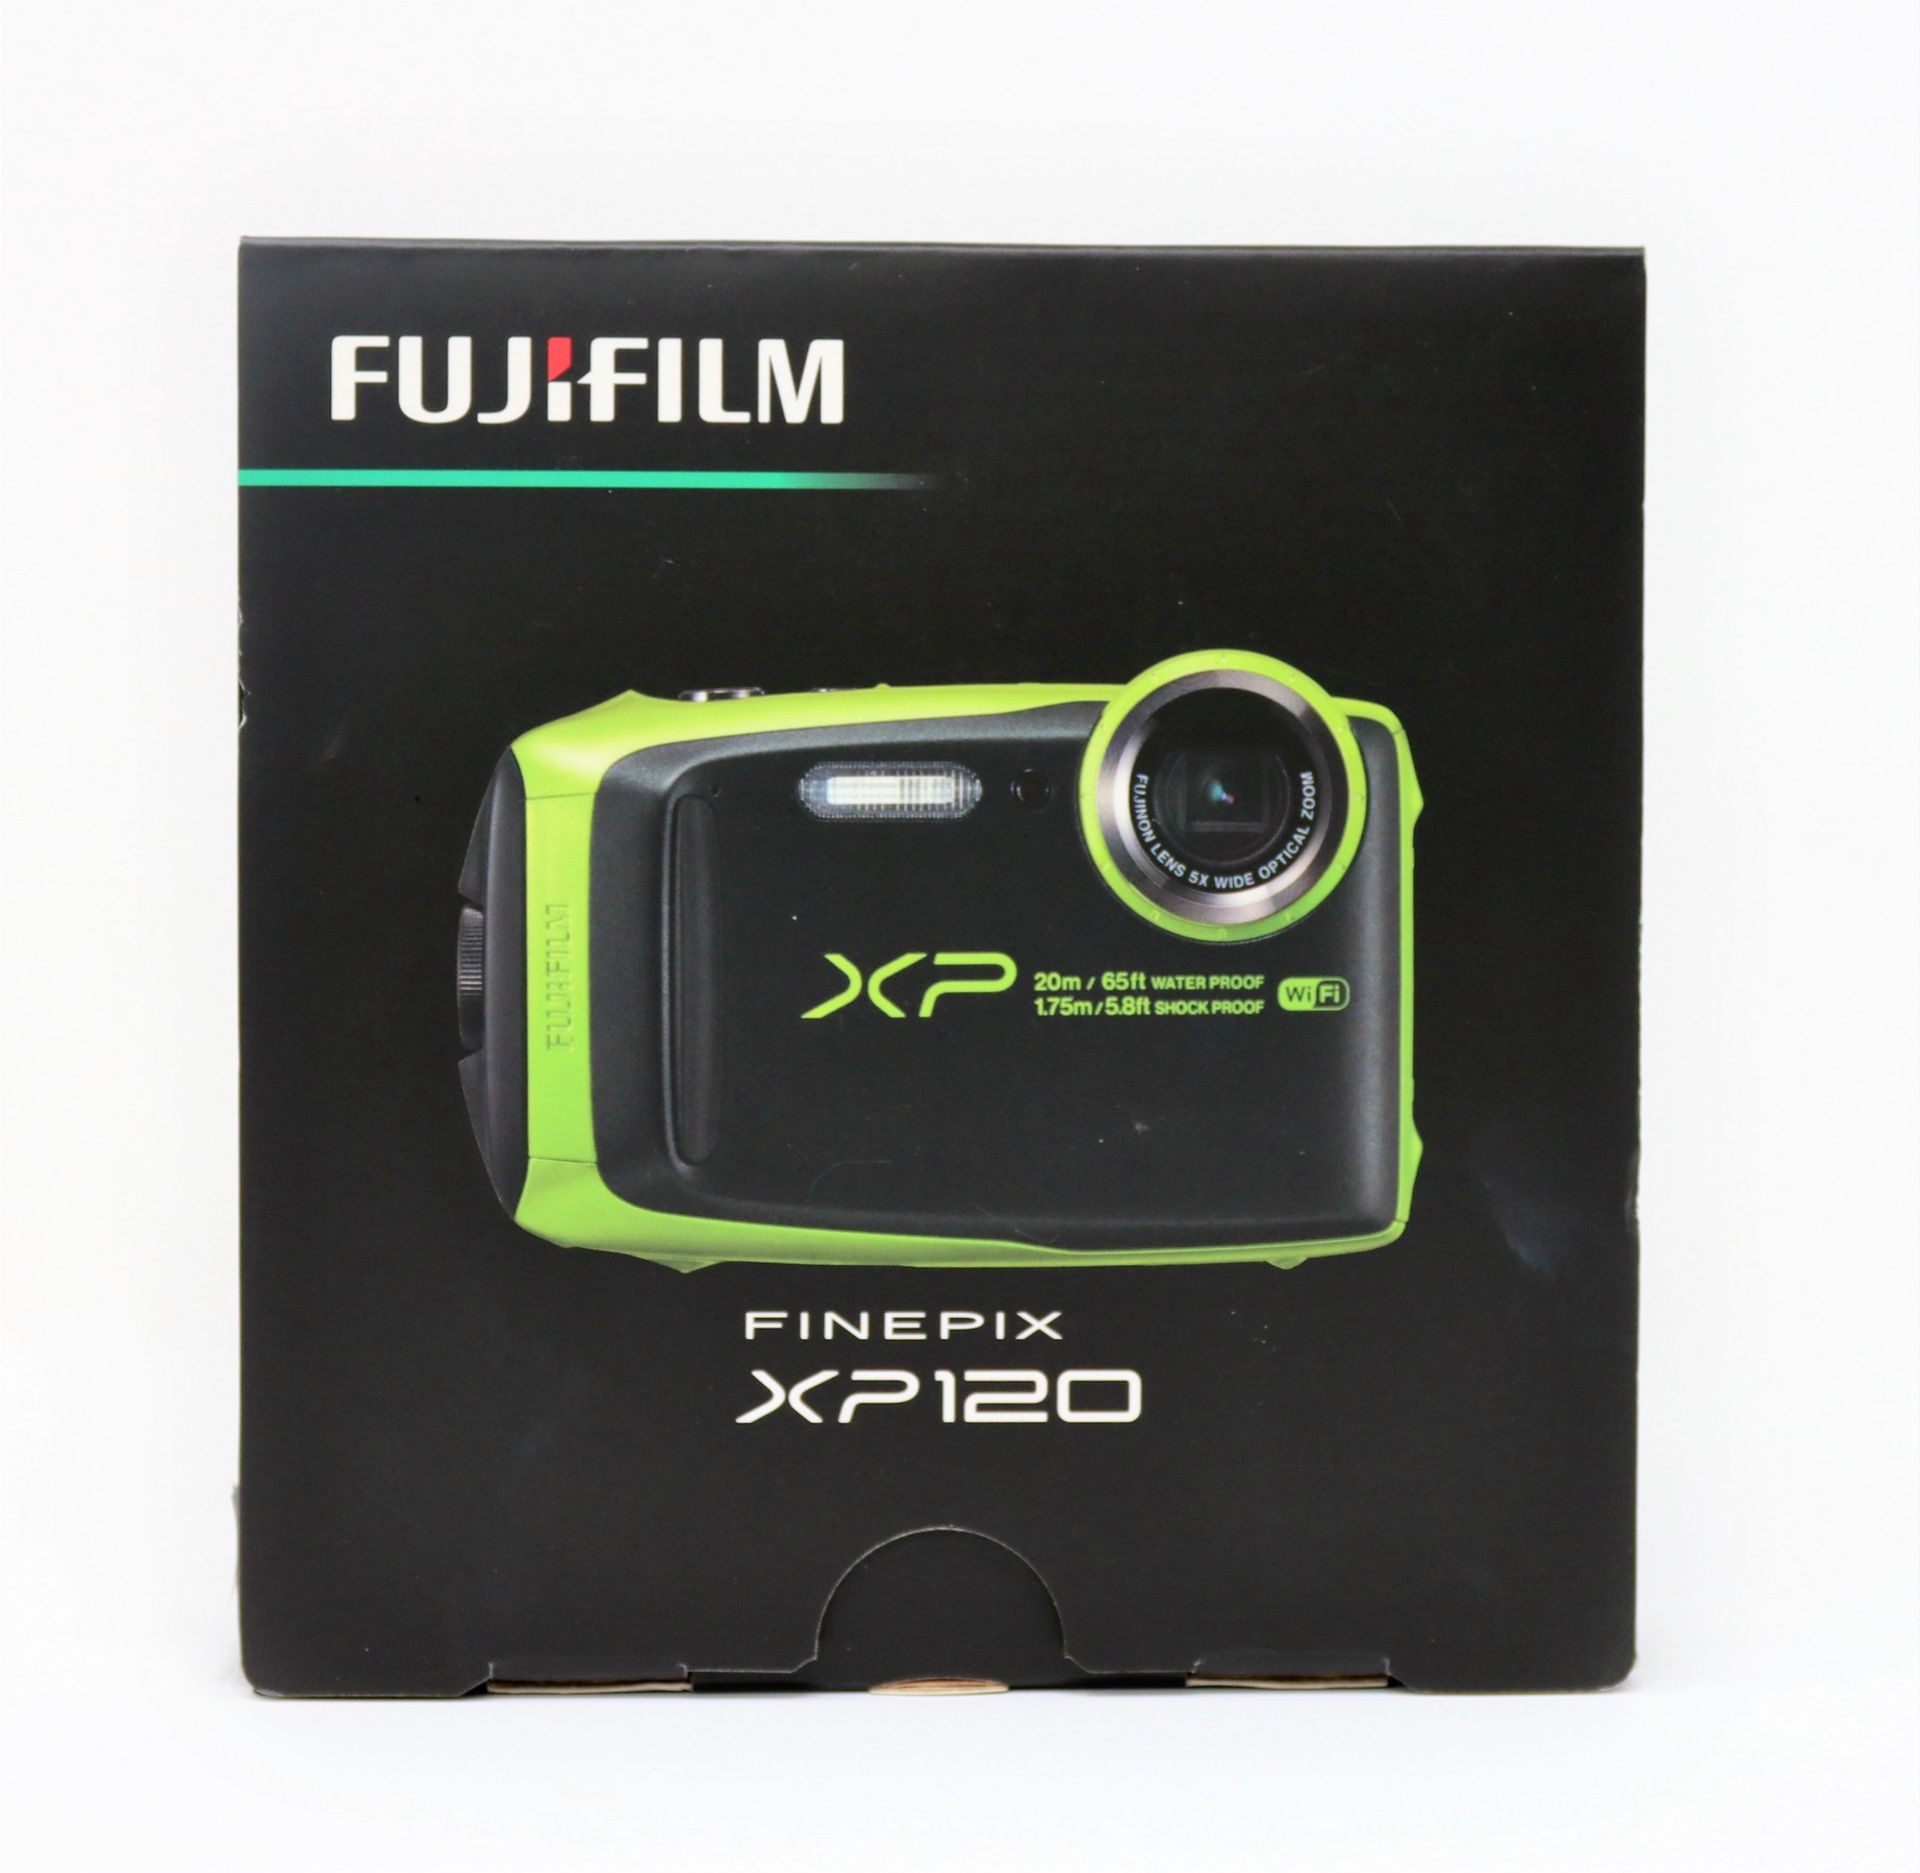 A boxed as new Fujifilm Finepix XP120 Camera in Lime Green (Two pin plug).